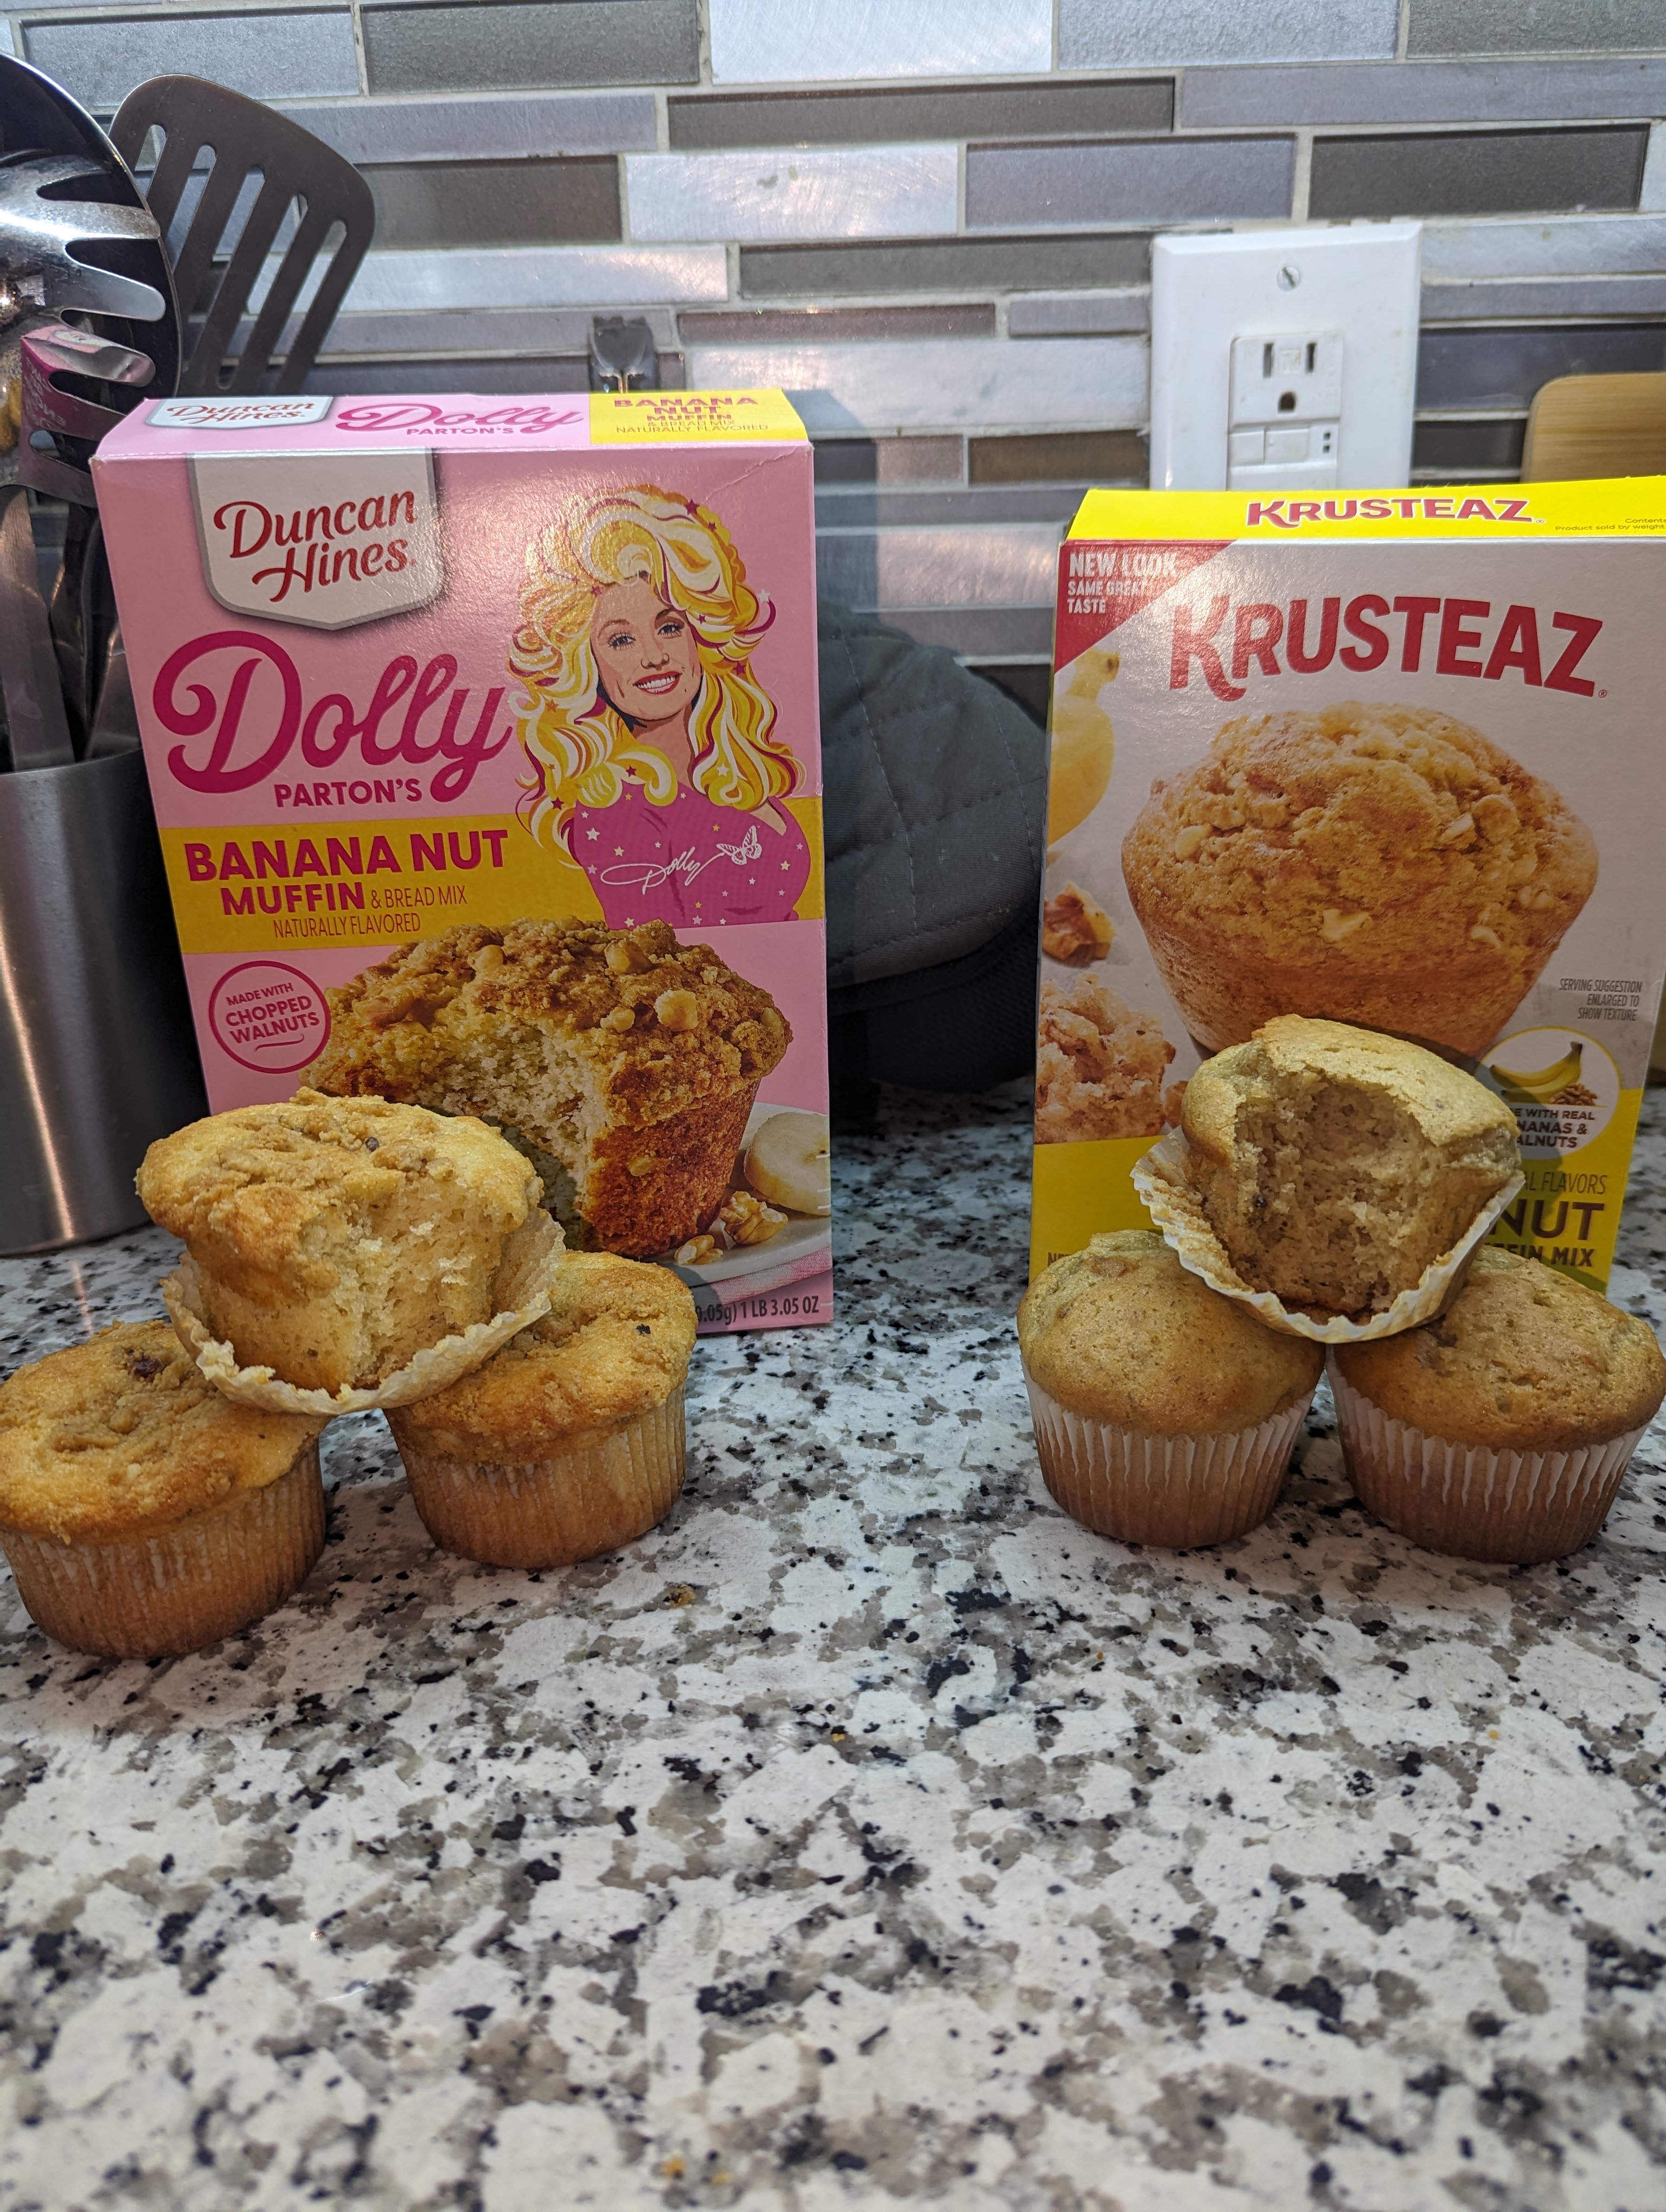 Comparing Krusteaz to Dolly Parton’s line – Banana Nut Muffin Mixes